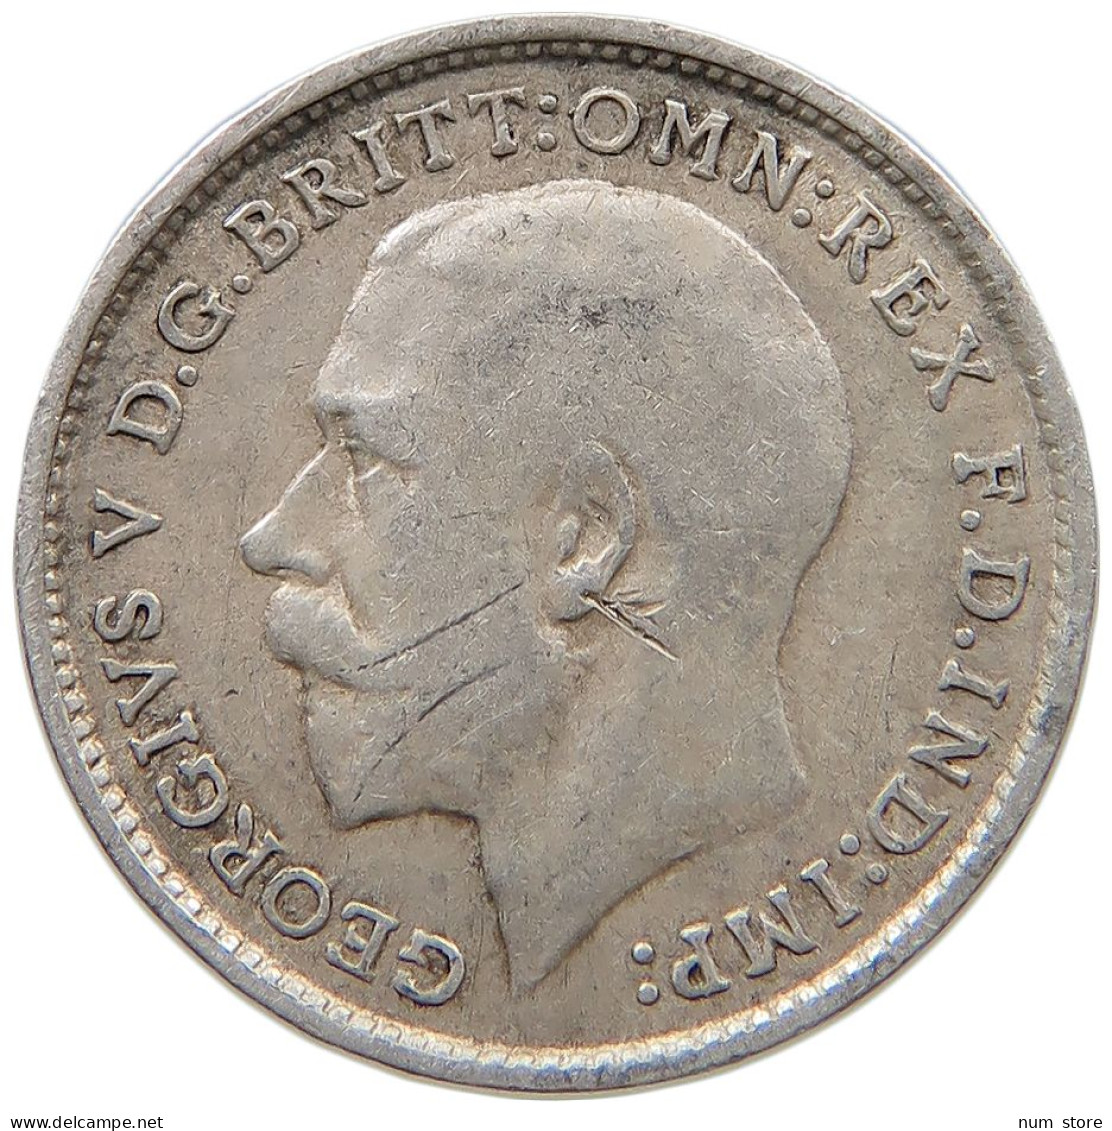 GREAT BRITAIN THREEPENCE 1913 #s059 0529 - F. 3 Pence